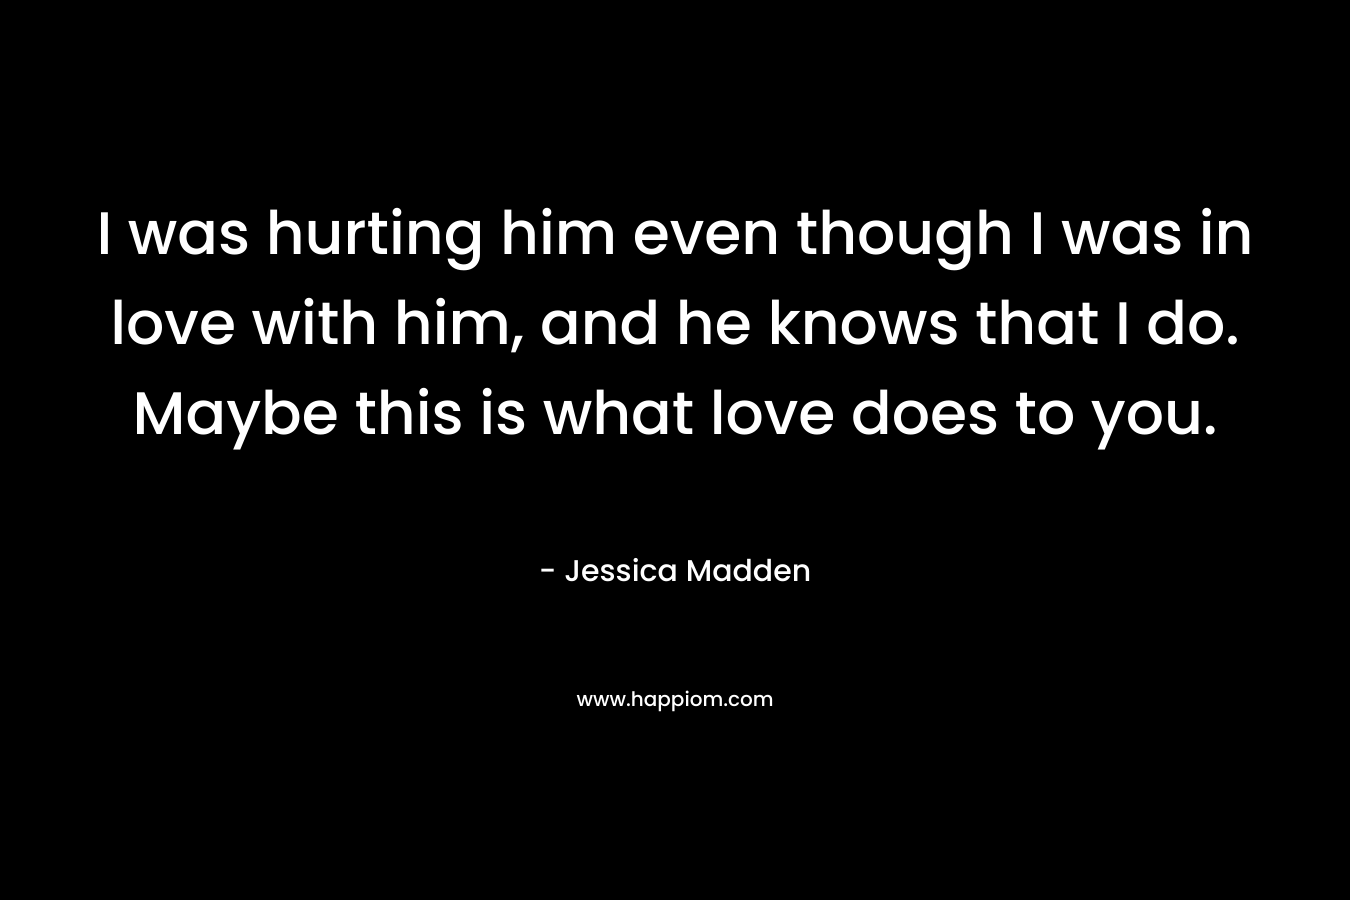 I was hurting him even though I was in love with him, and he knows that I do. Maybe this is what love does to you.